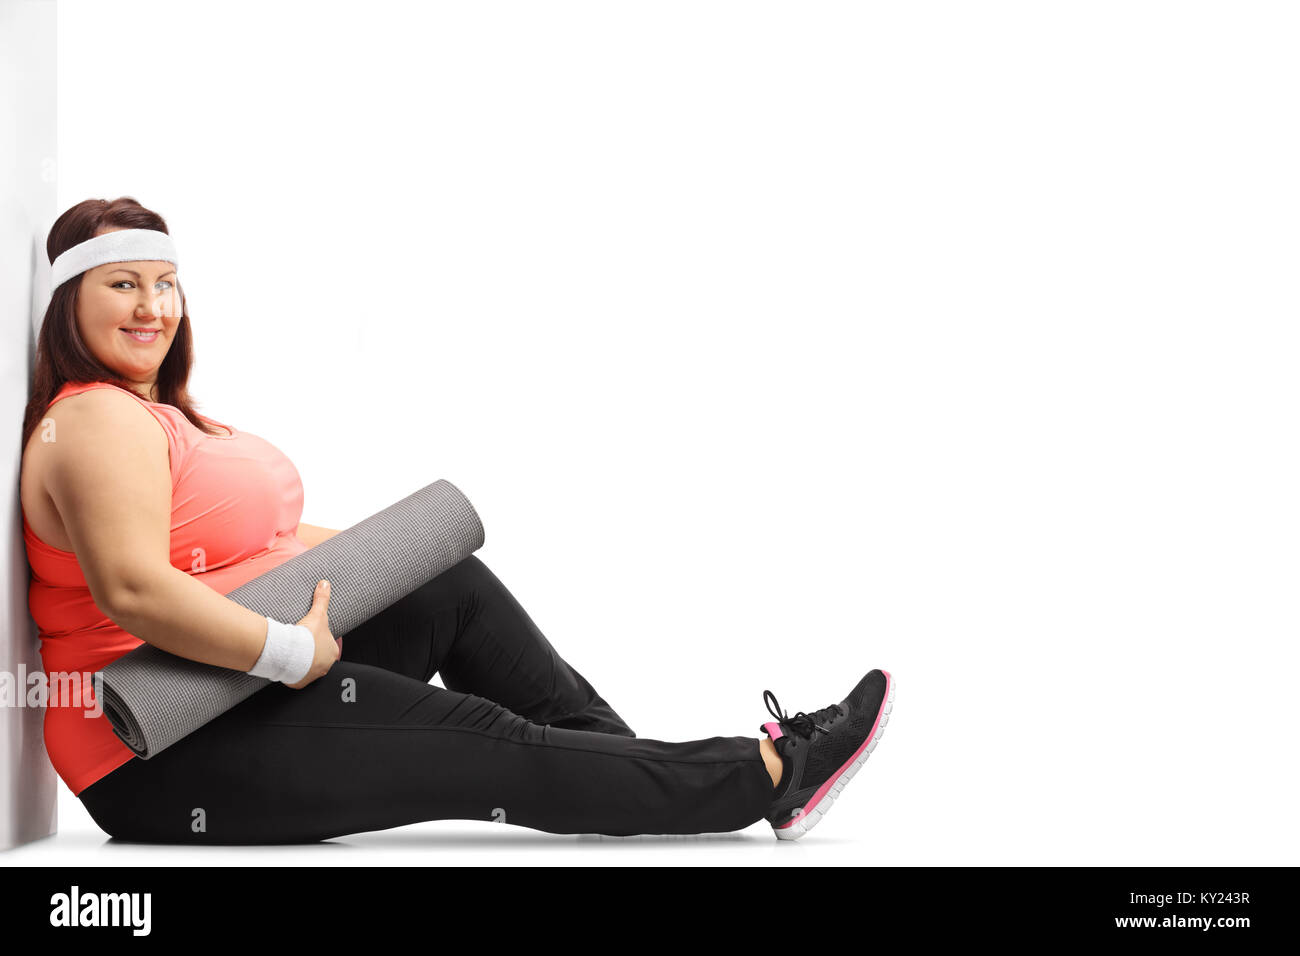 Cute African American Woman Plus Size Sitting on Fitness Mat Stock